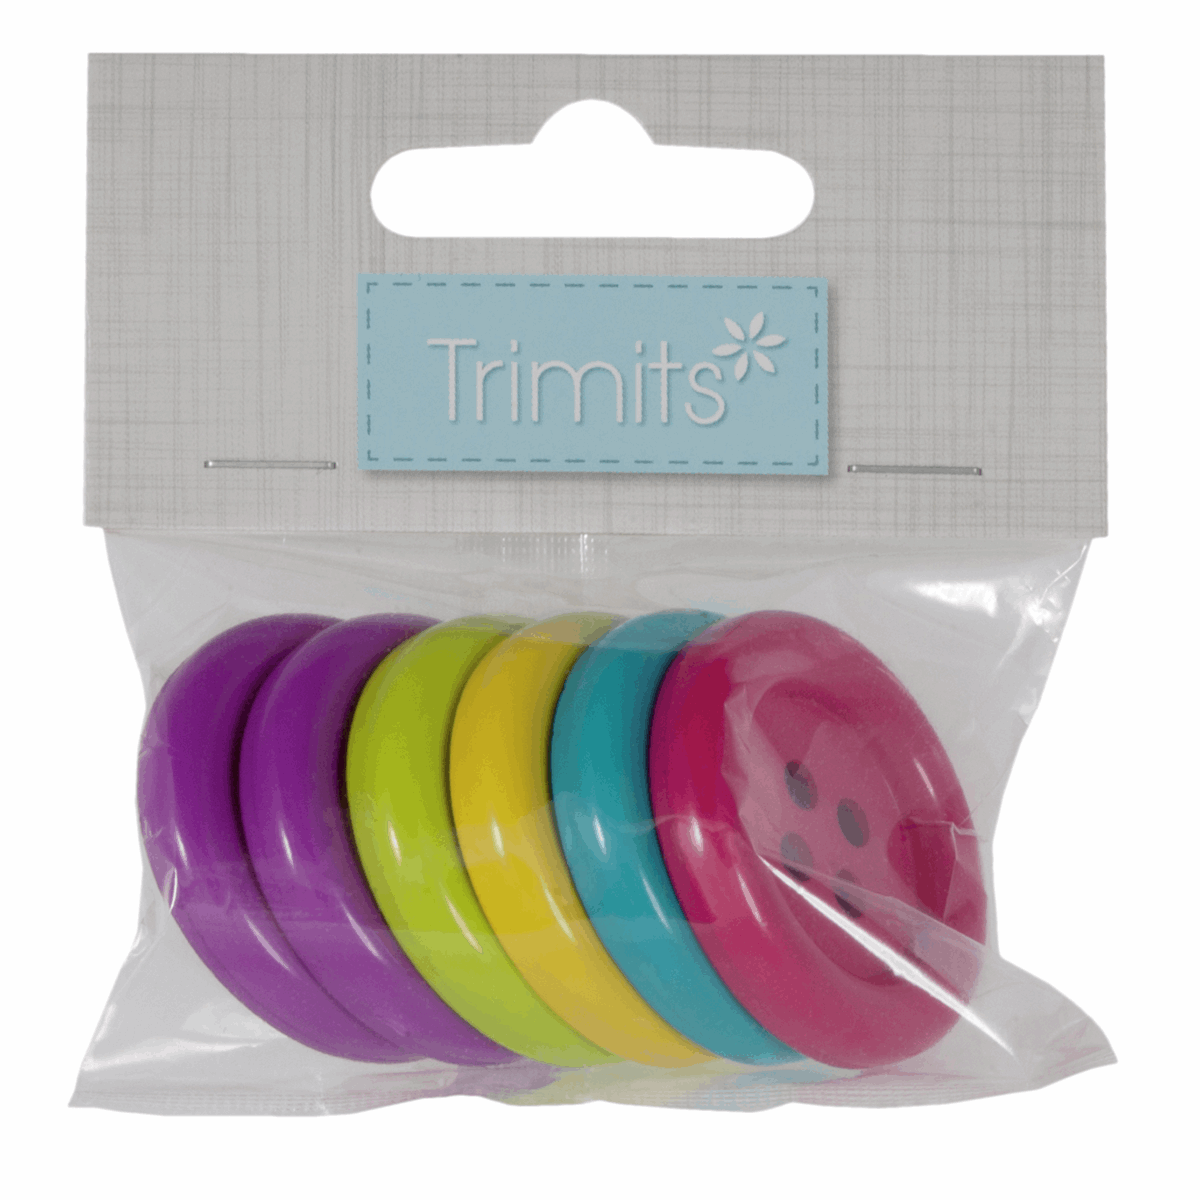 GIANT Craft Buttons - 100% Nylon